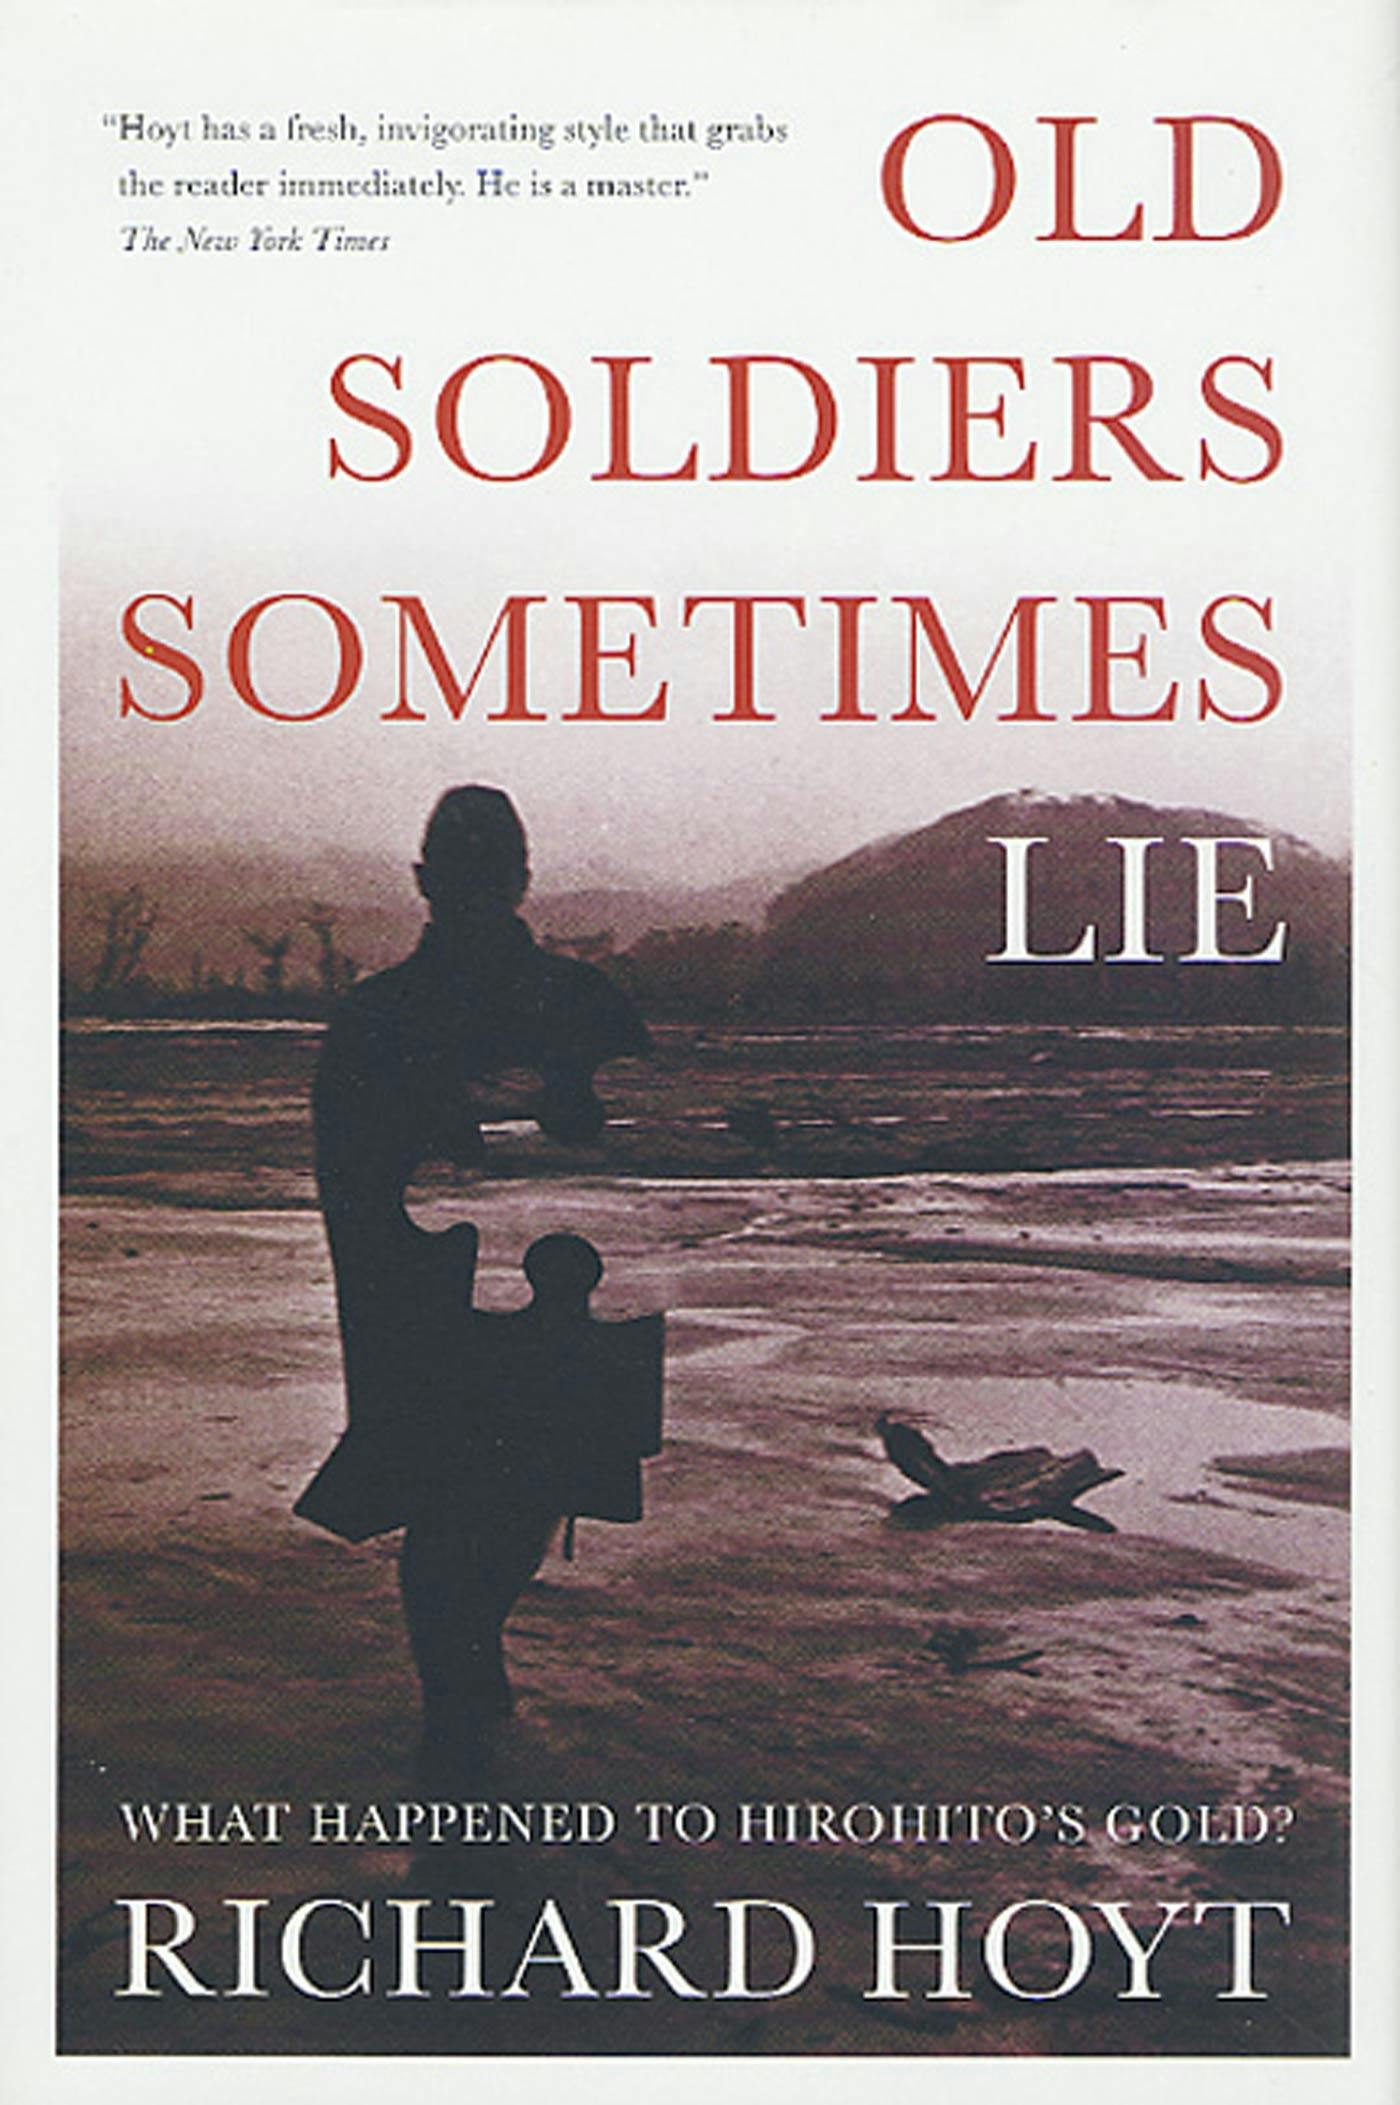 Cover for the book titled as: Old Soldiers Sometimes Lie